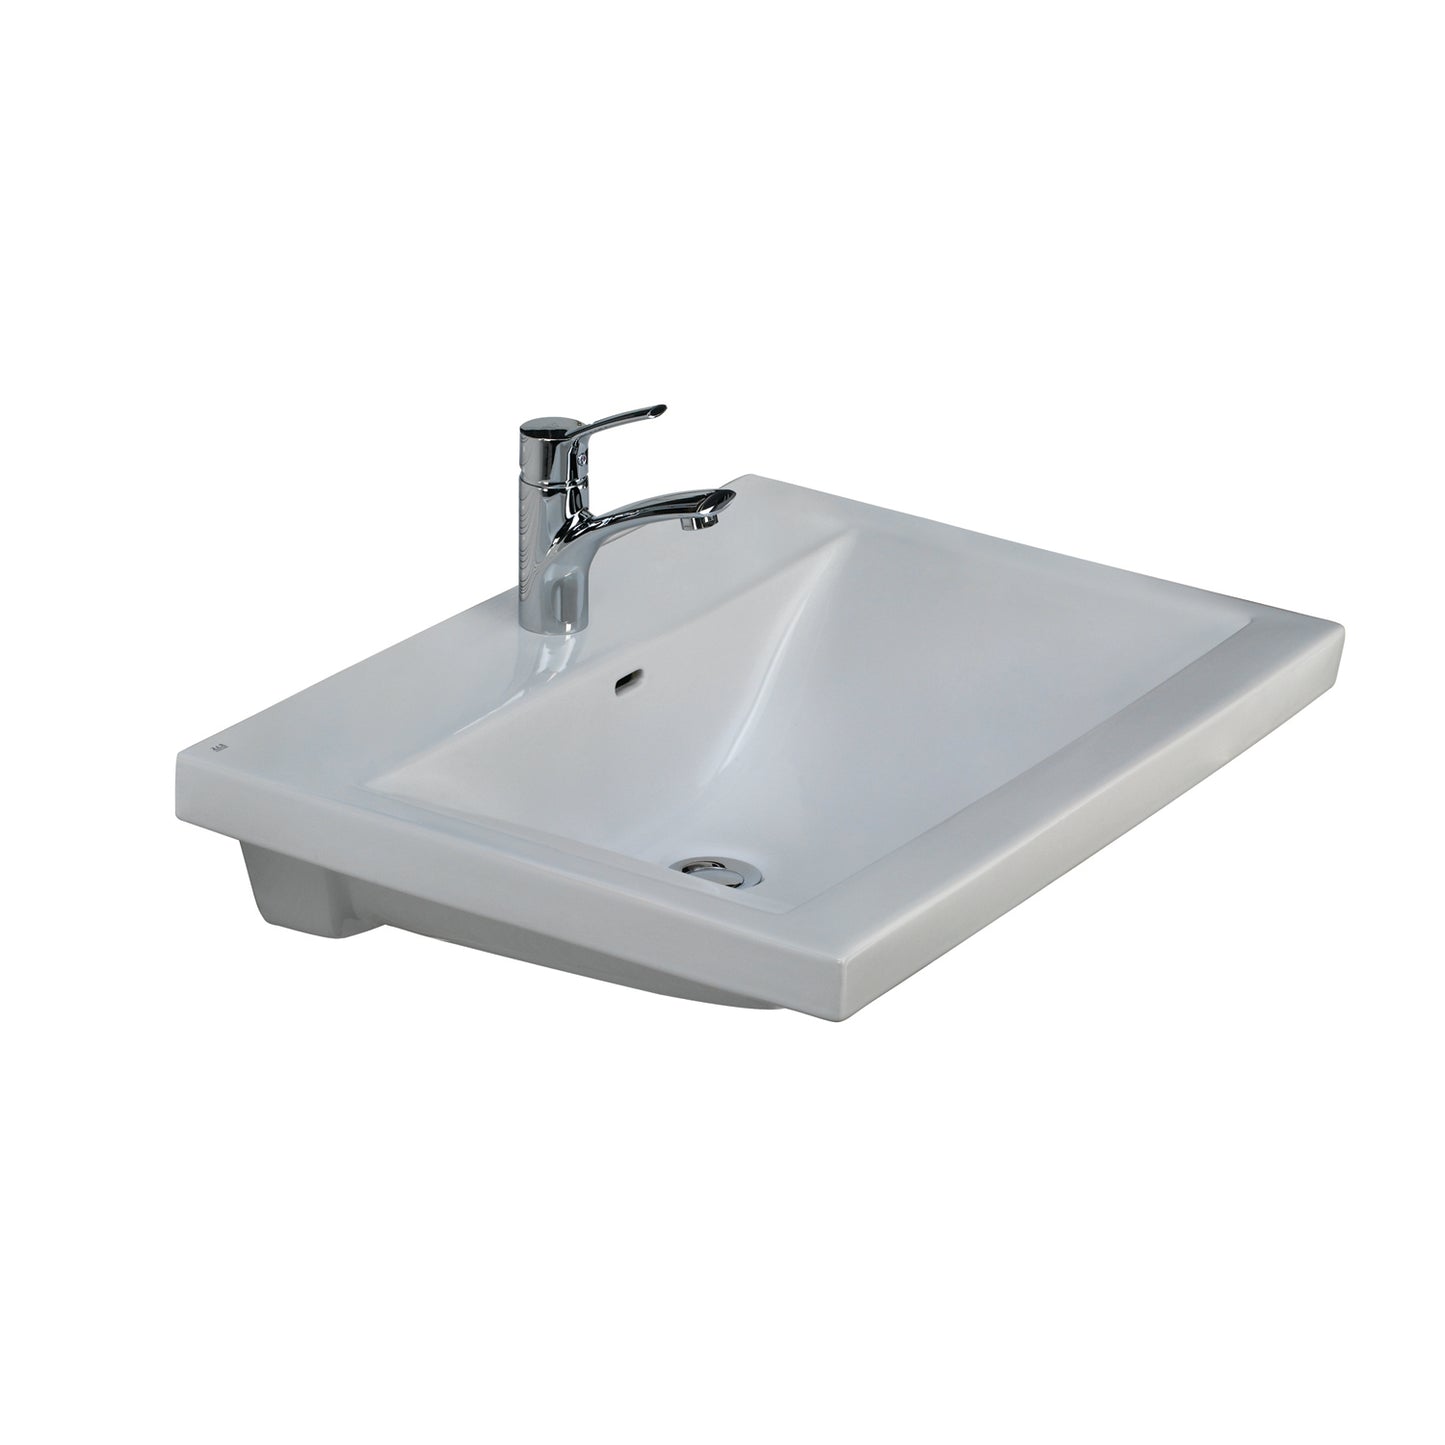 Mistral 650 Wall Hung Bathroom Sink 1 Faucet Hole White